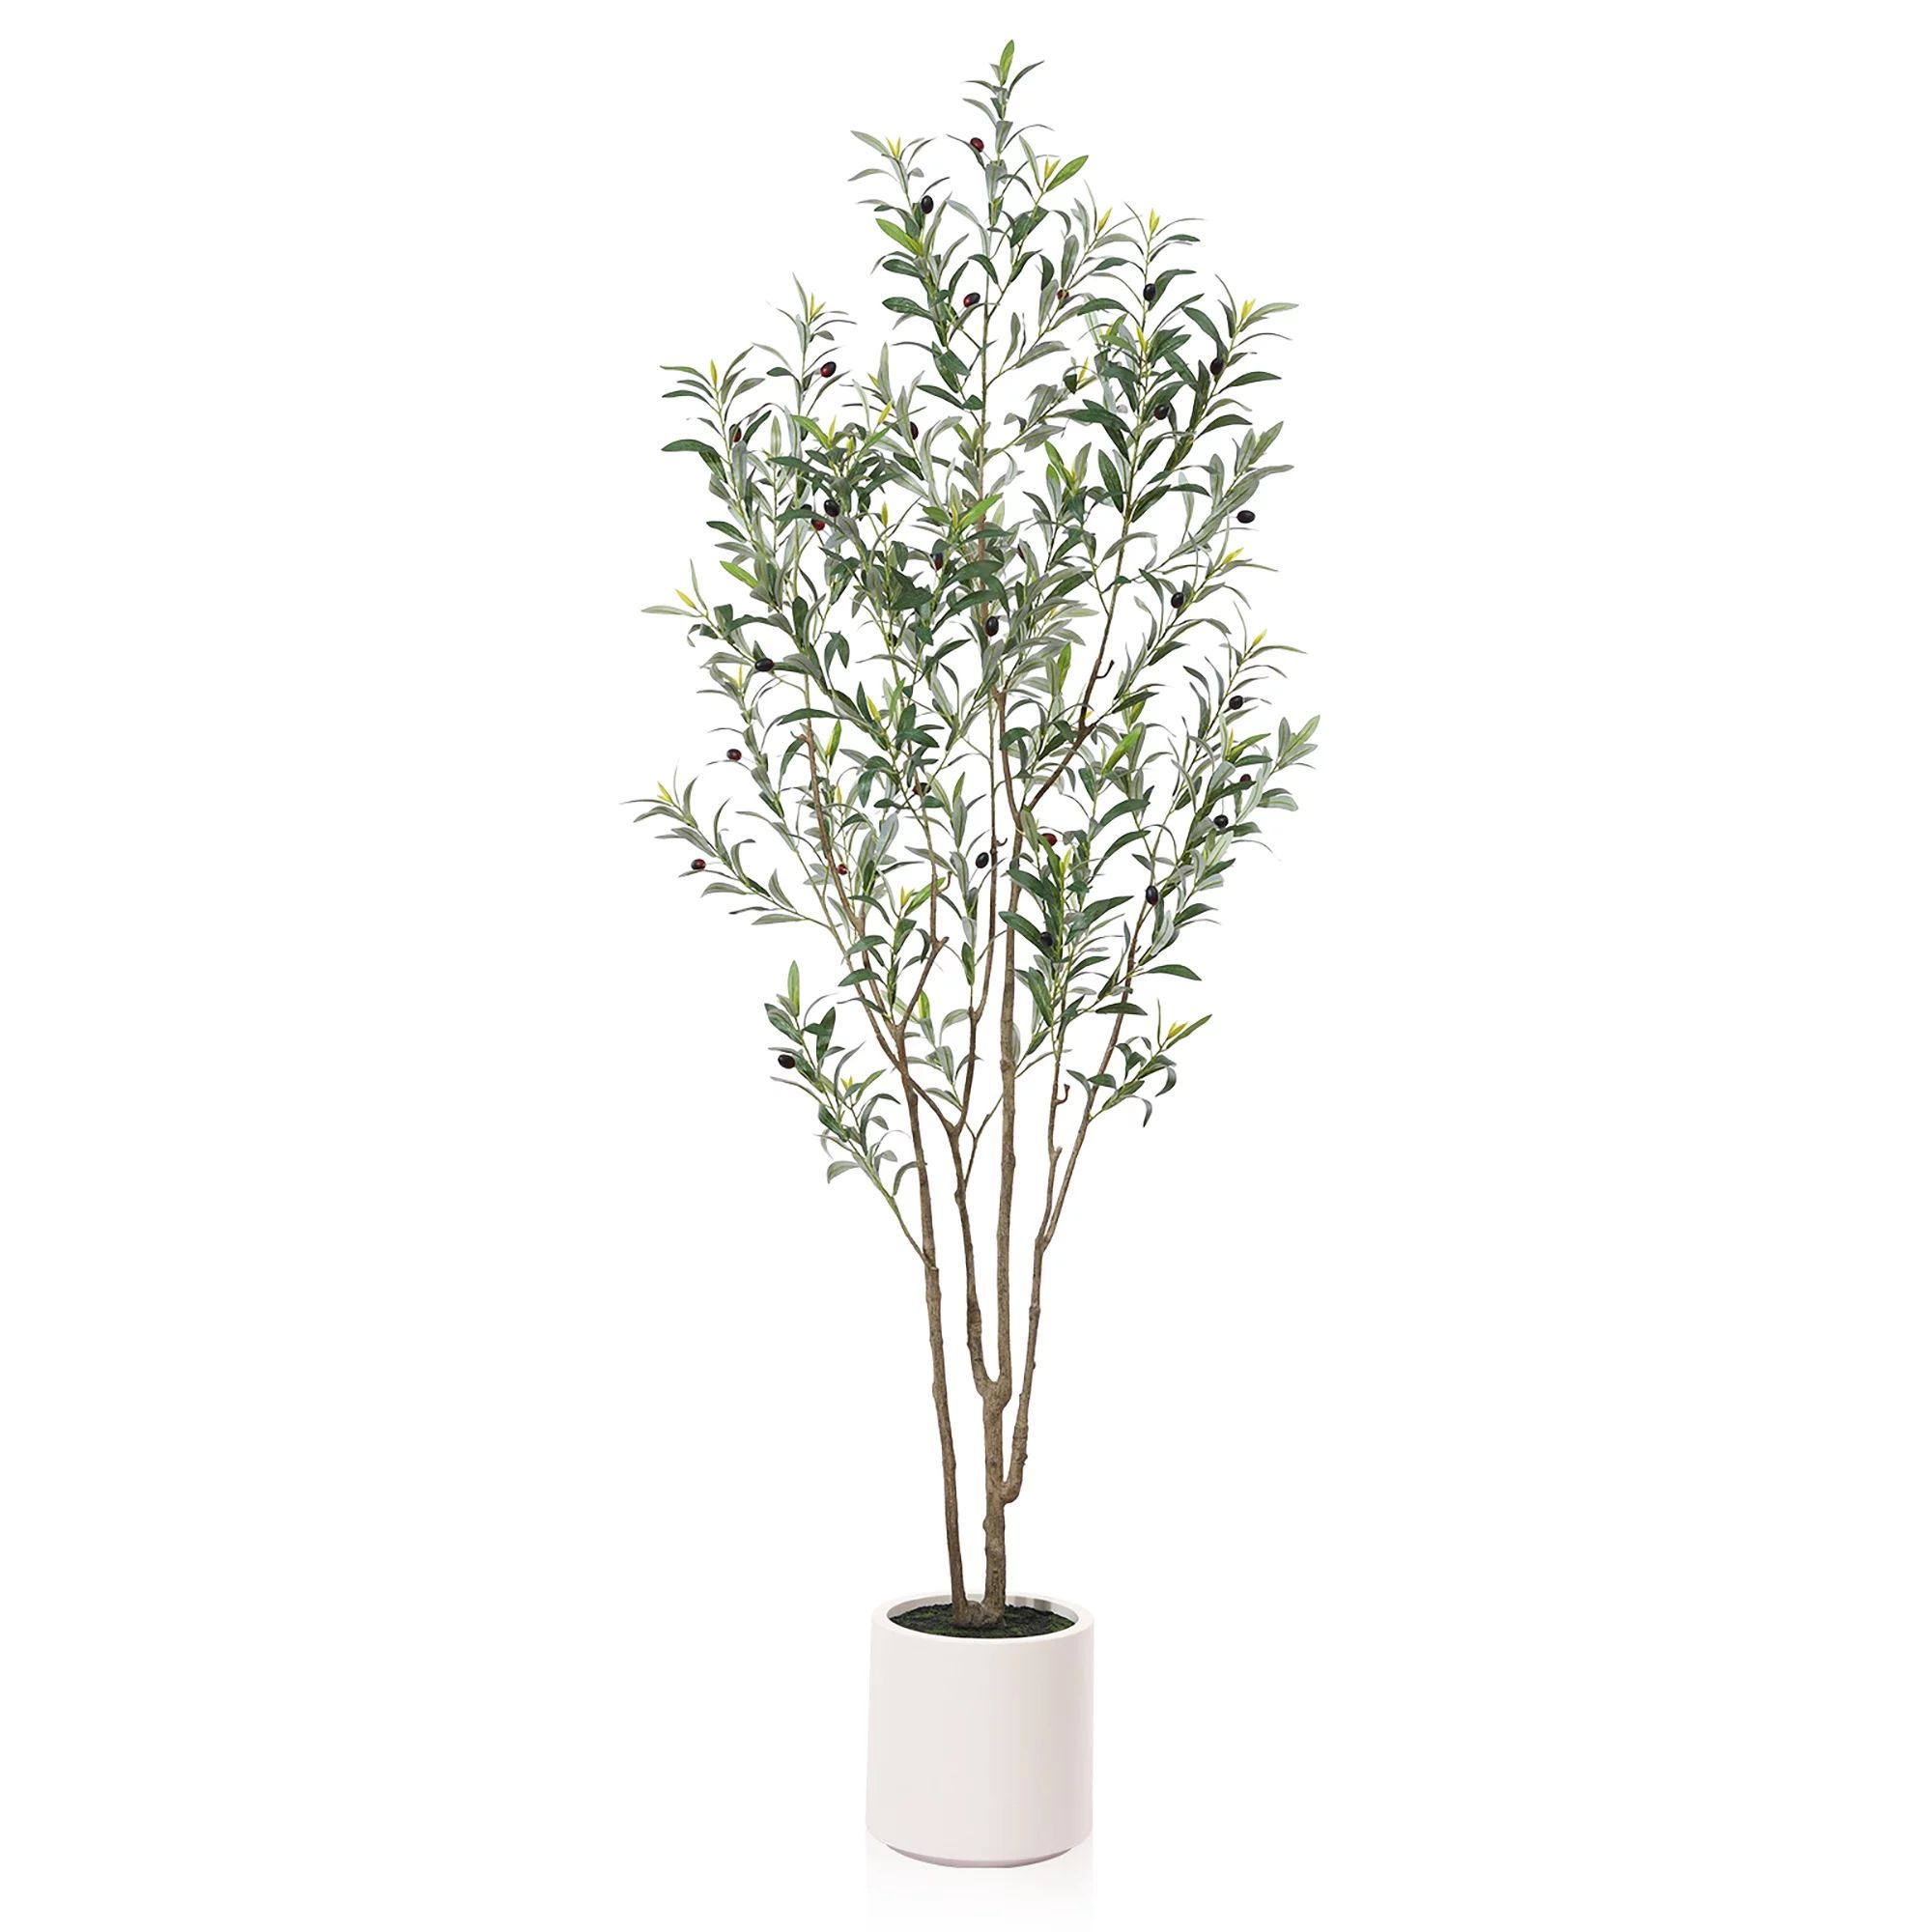 7 ft Tall Large Artificial Olive Tree with 10.6 inches White Planter ,Fake Olive Trees for Indoor... | Walmart (US)